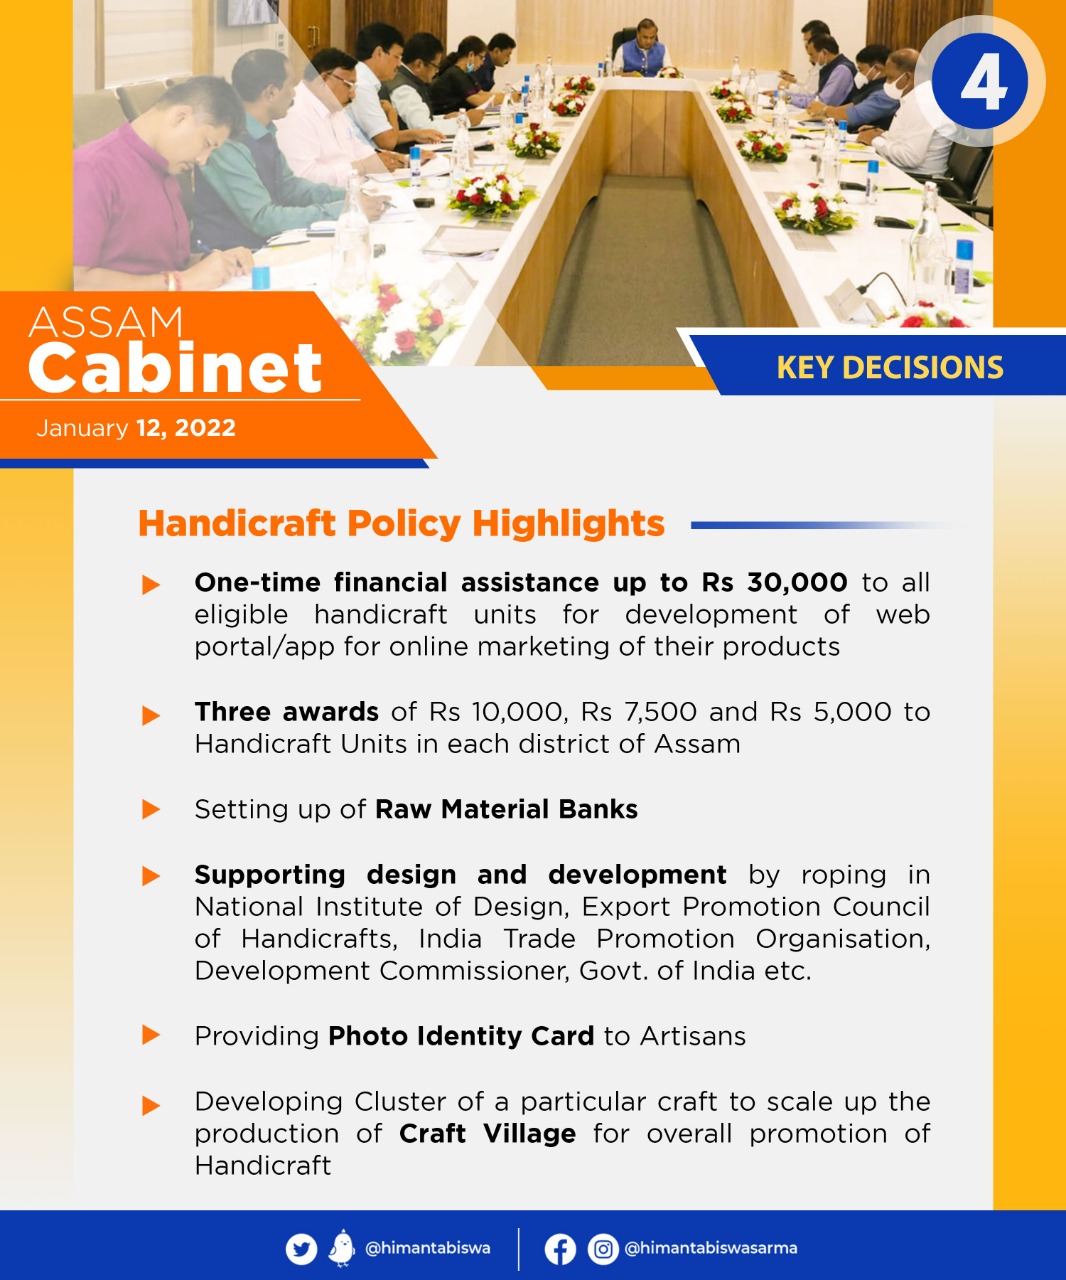 Cabinet Decision taken on 12th of January, 2022 (4)